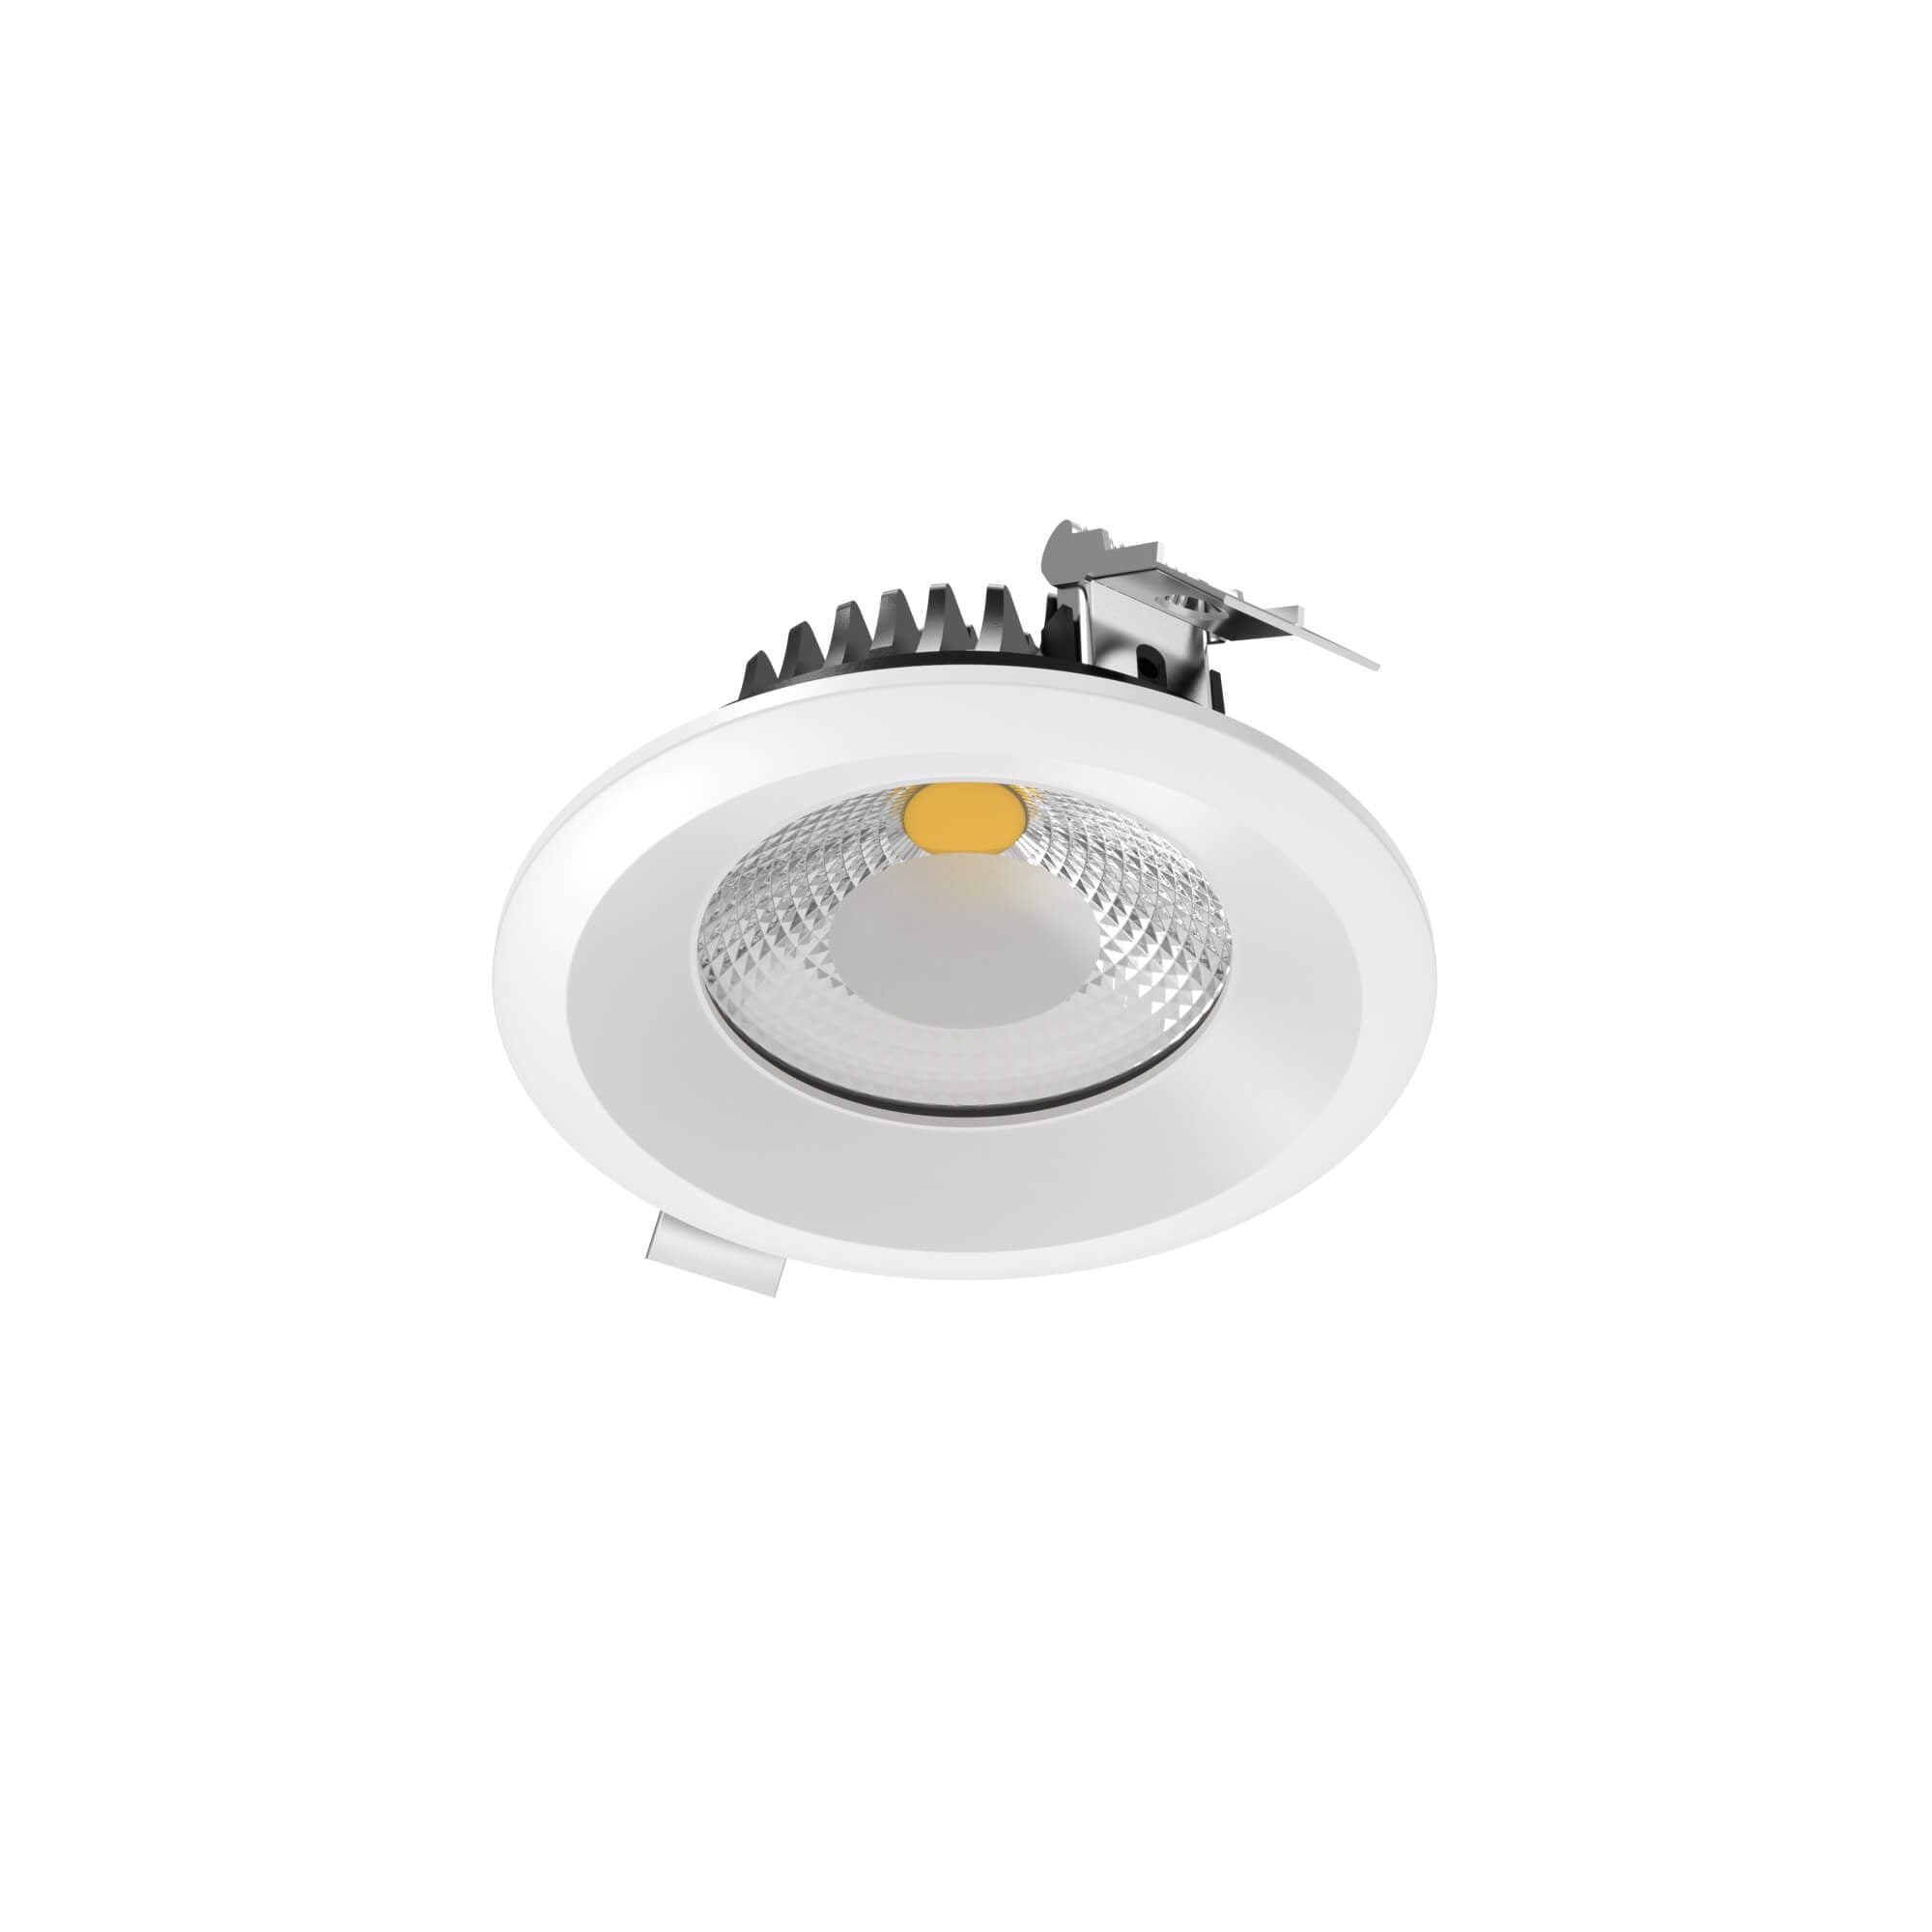 6" High Powered LED Commercial Down Light